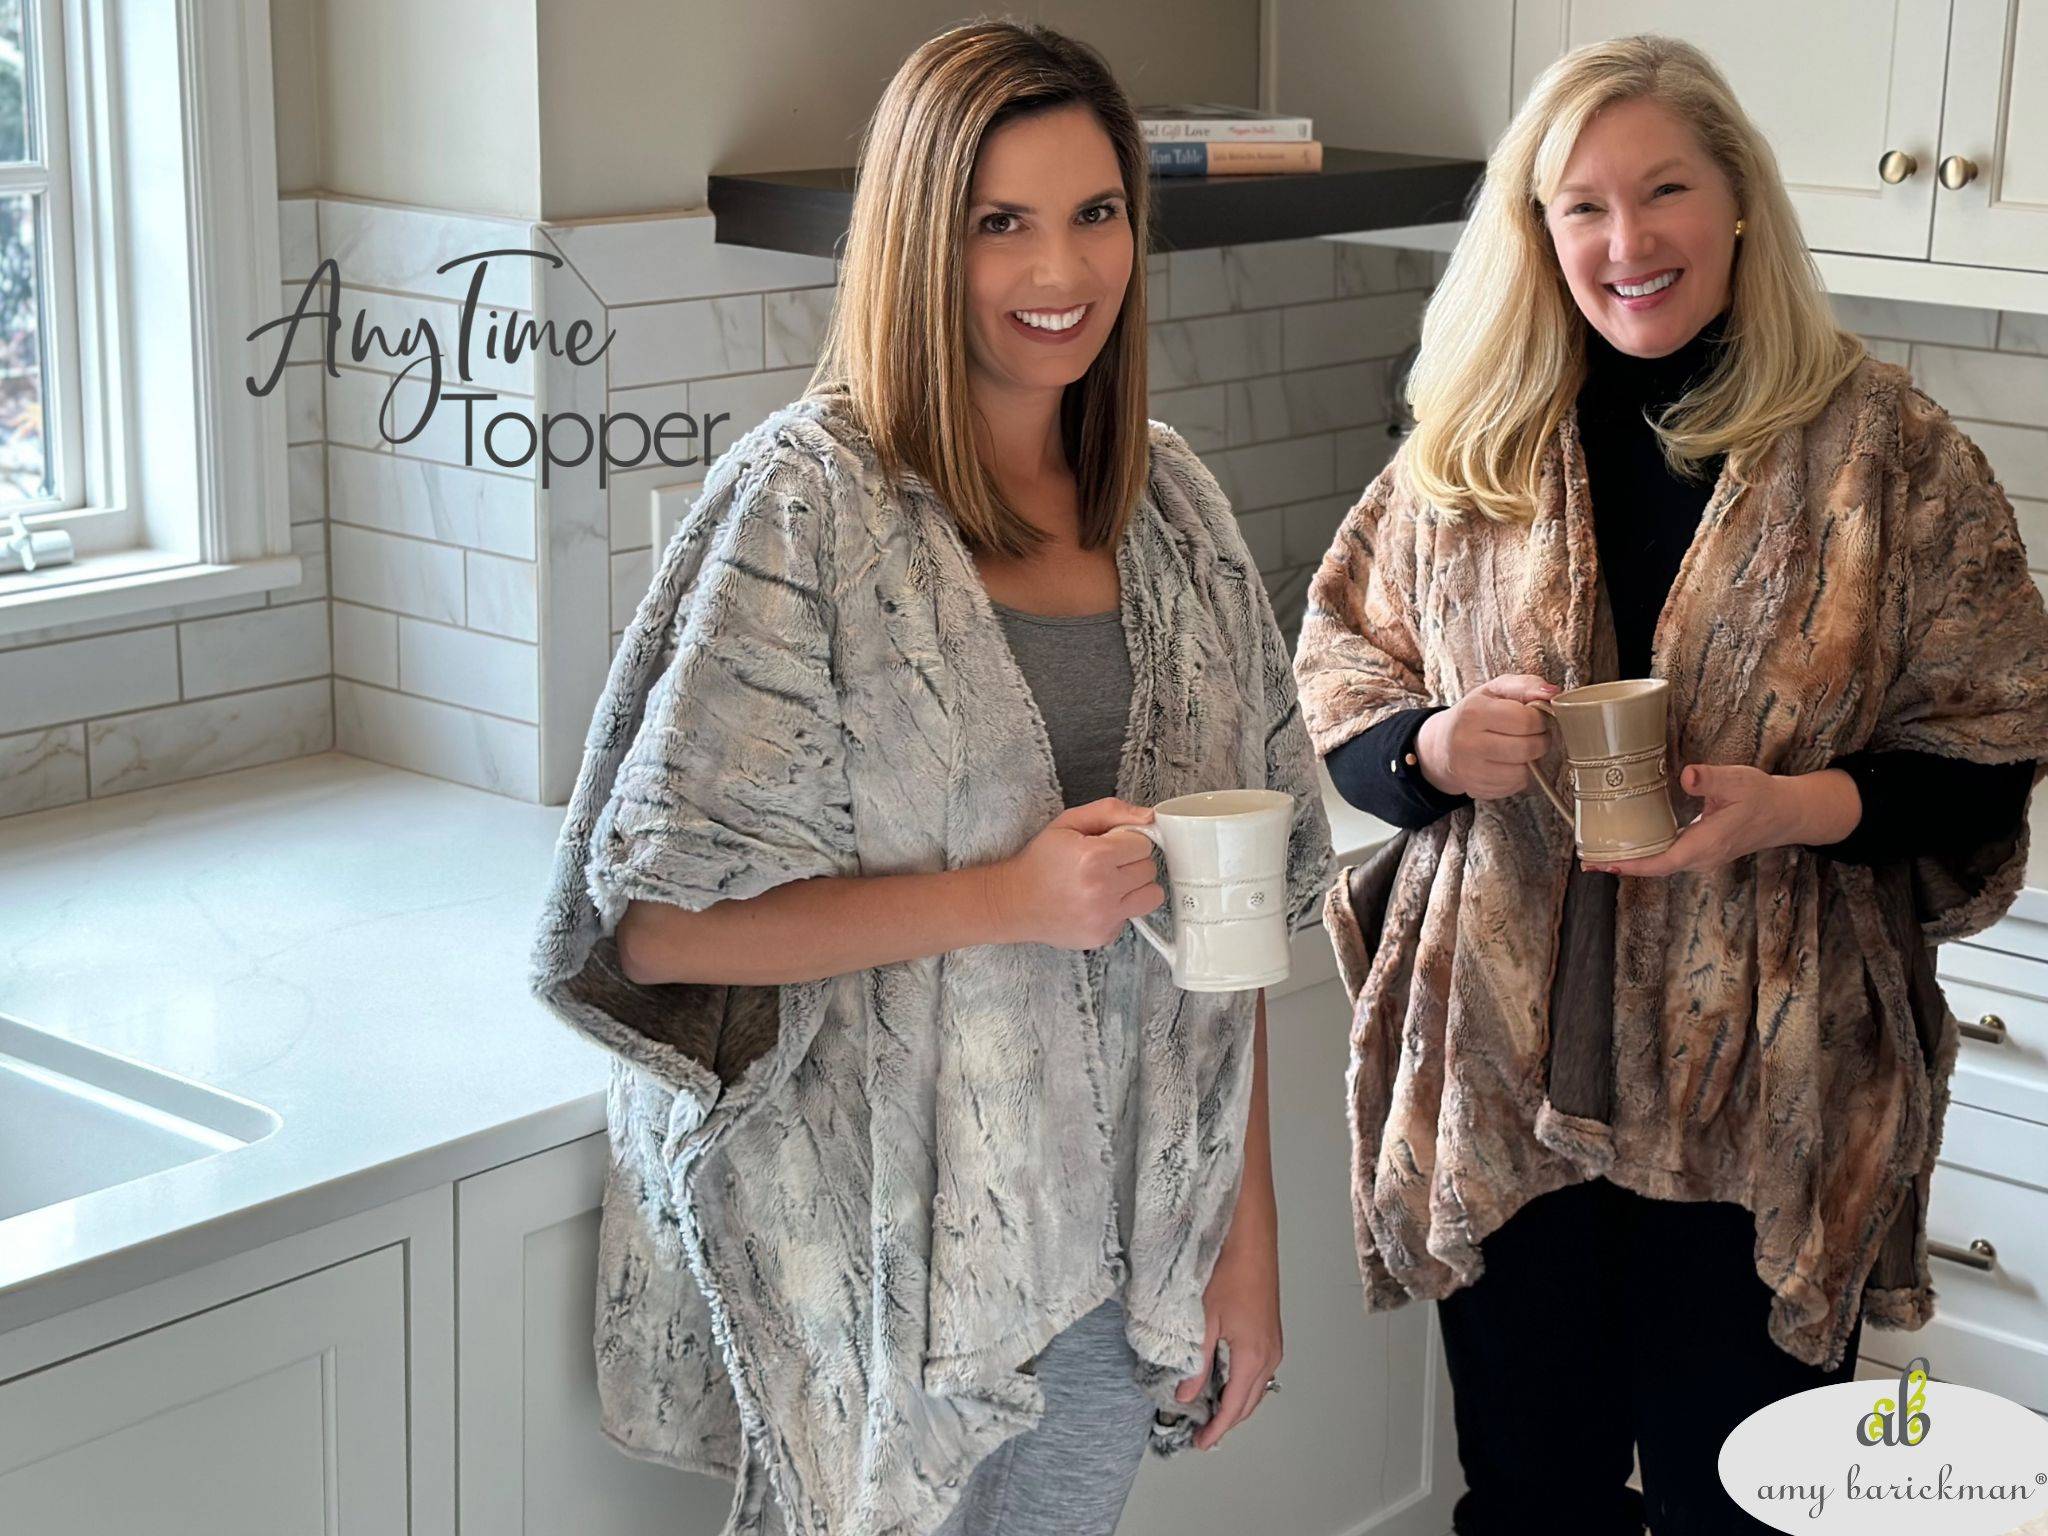 Anytime topper by Amy Barickman in Luxe Cuddle